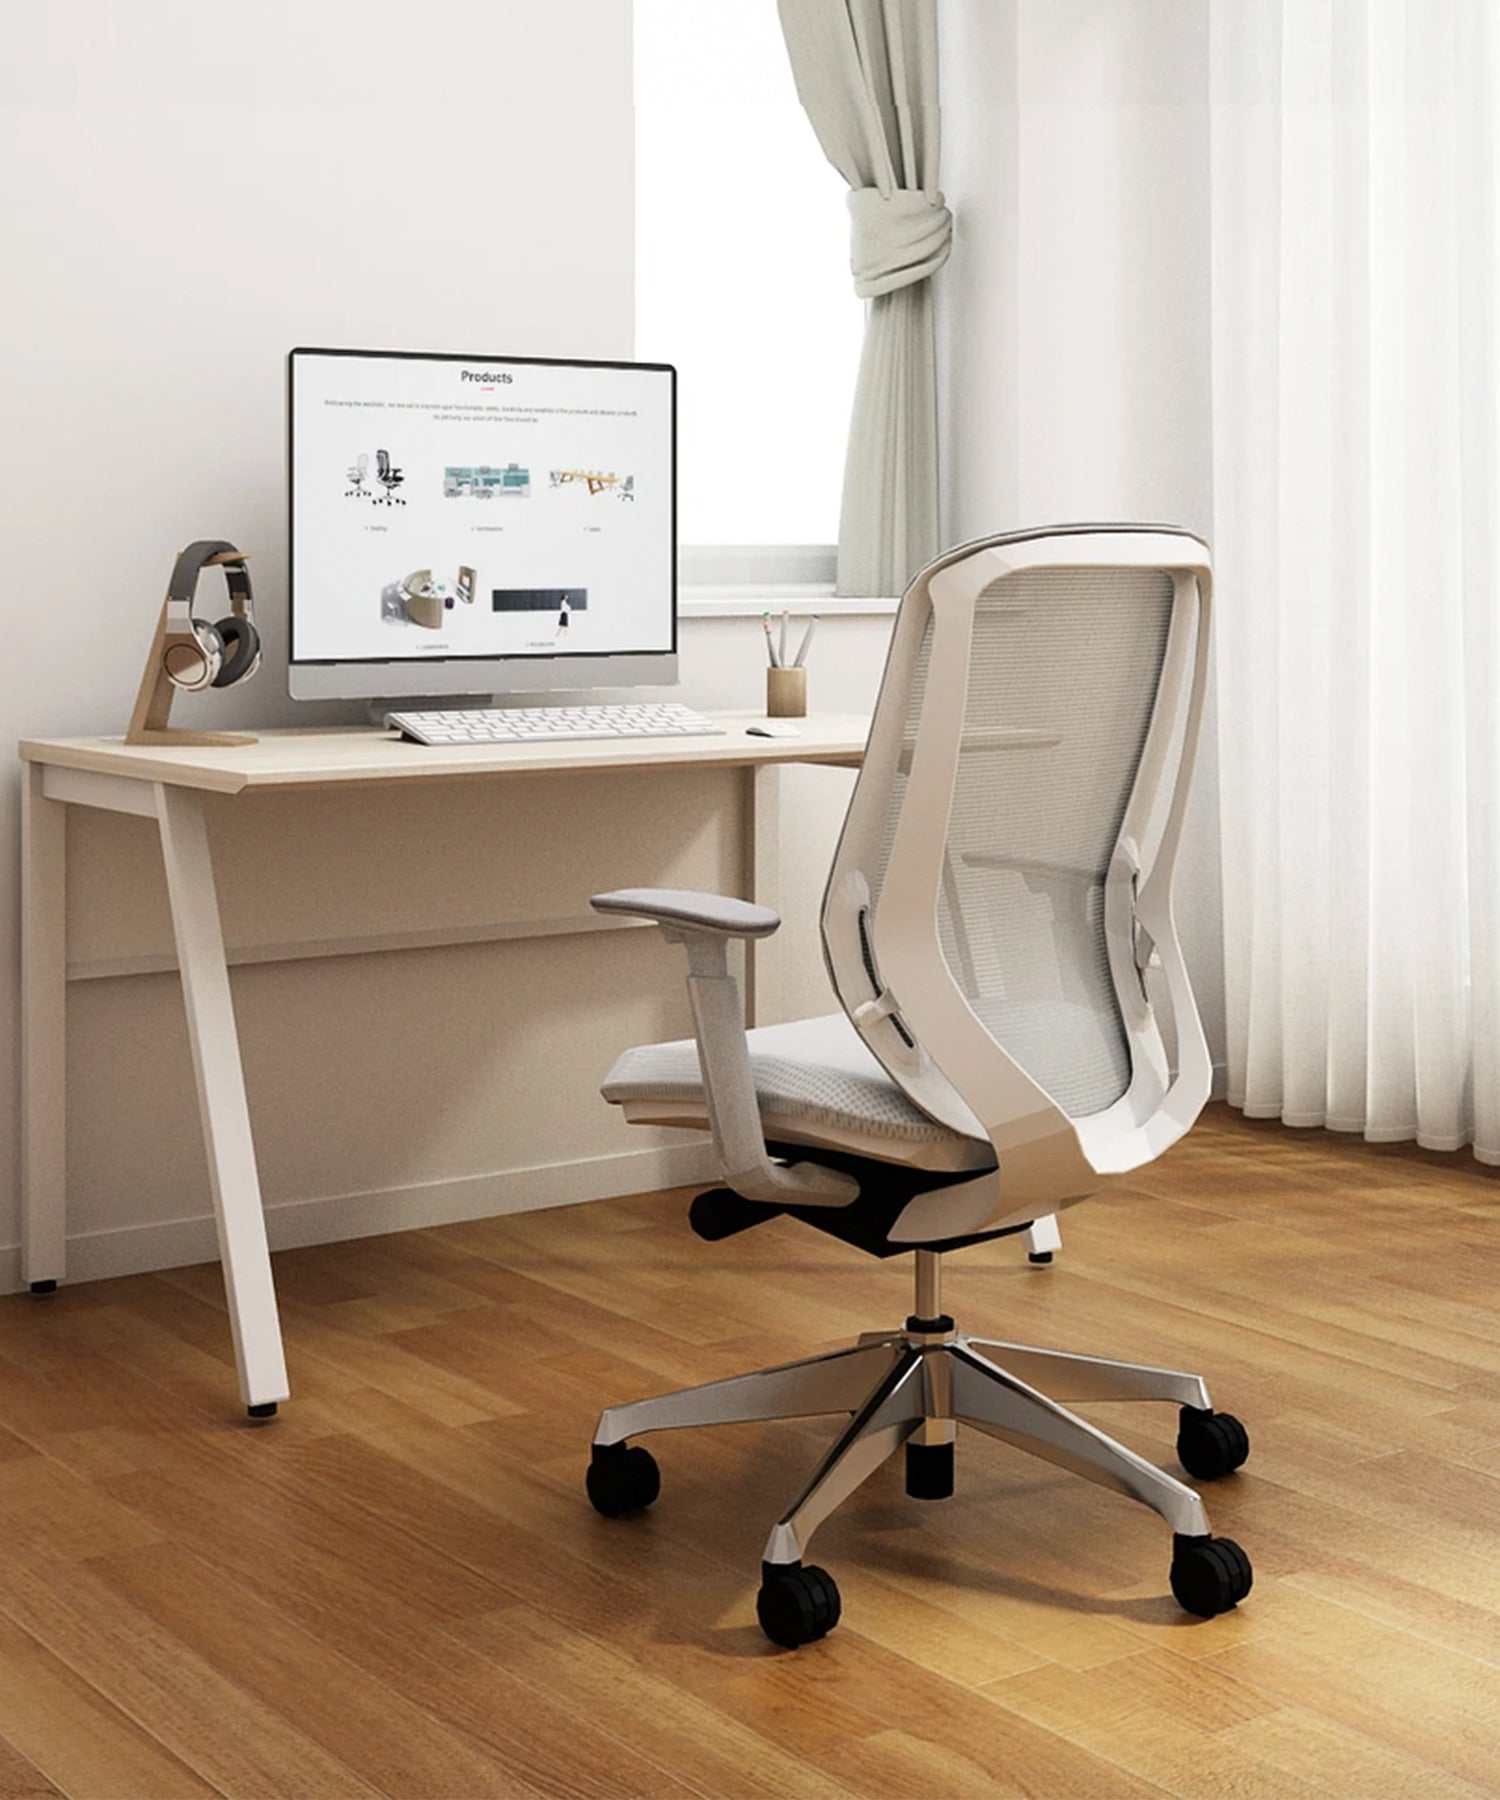 sylphy ergonomic chair in study room